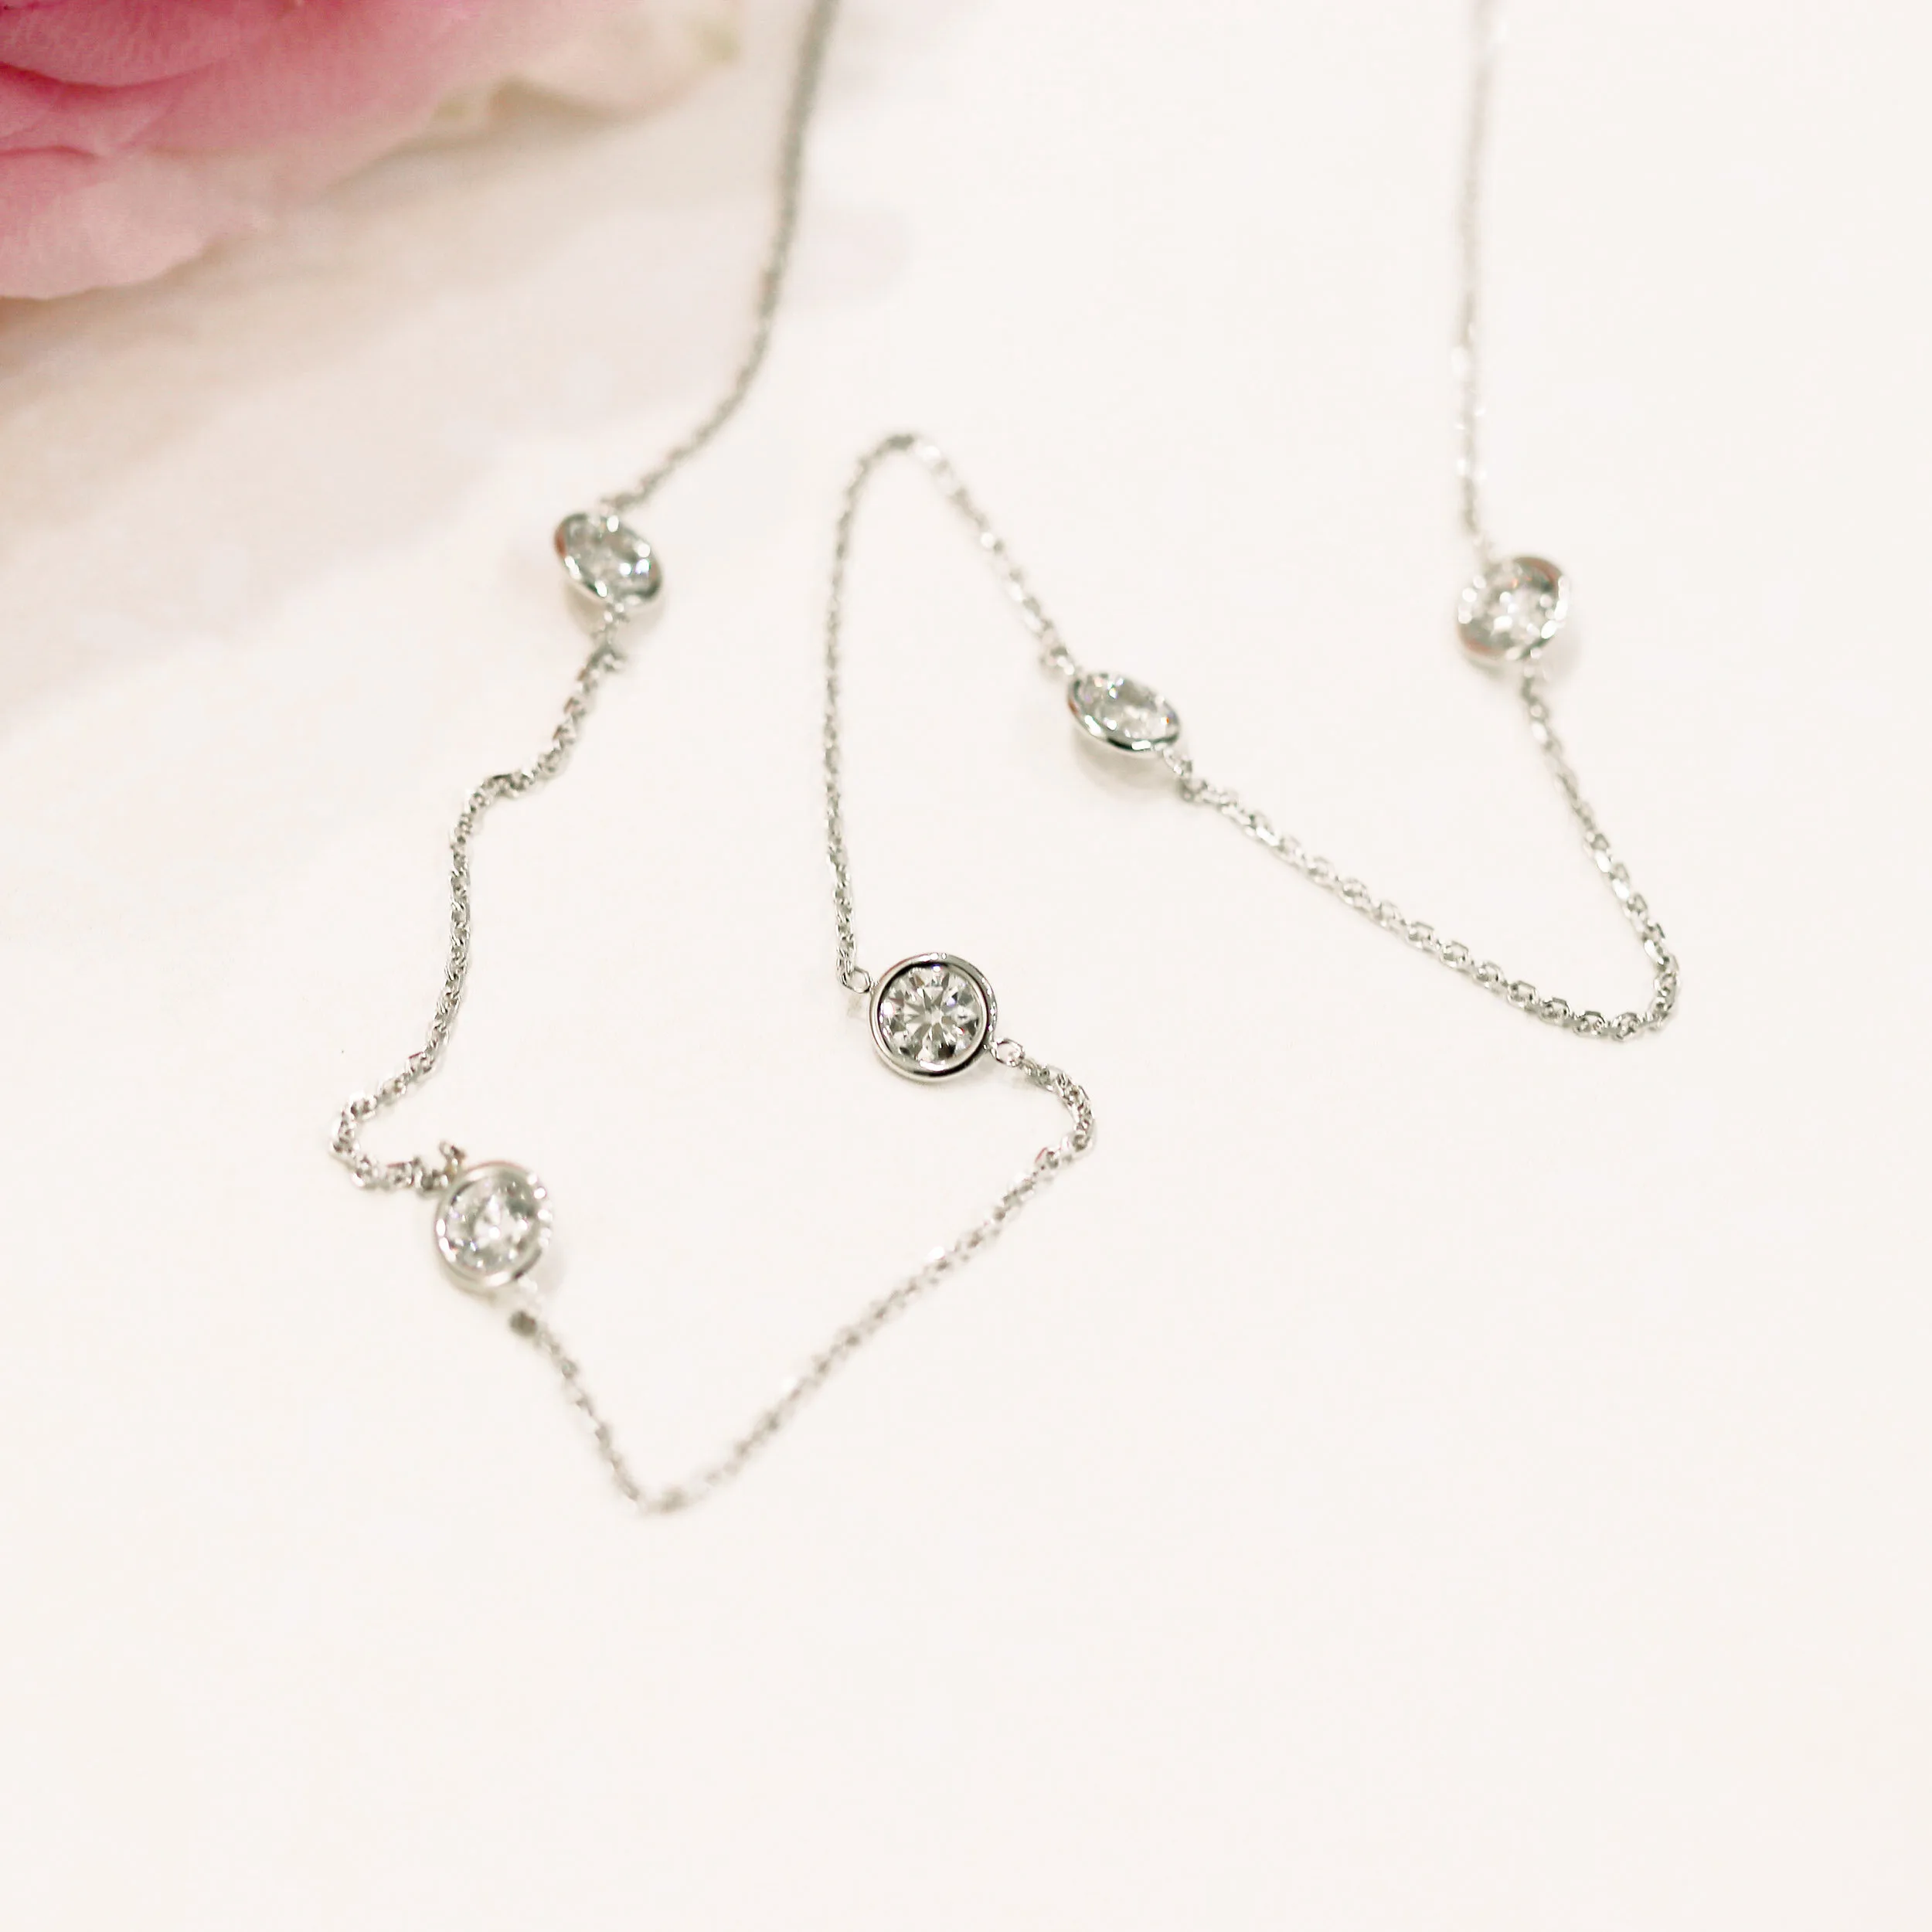 five-diamonds-by-the-yard-necklace-white-gold_1582998316510-1CASUBNV8QV41Q4YIH7F